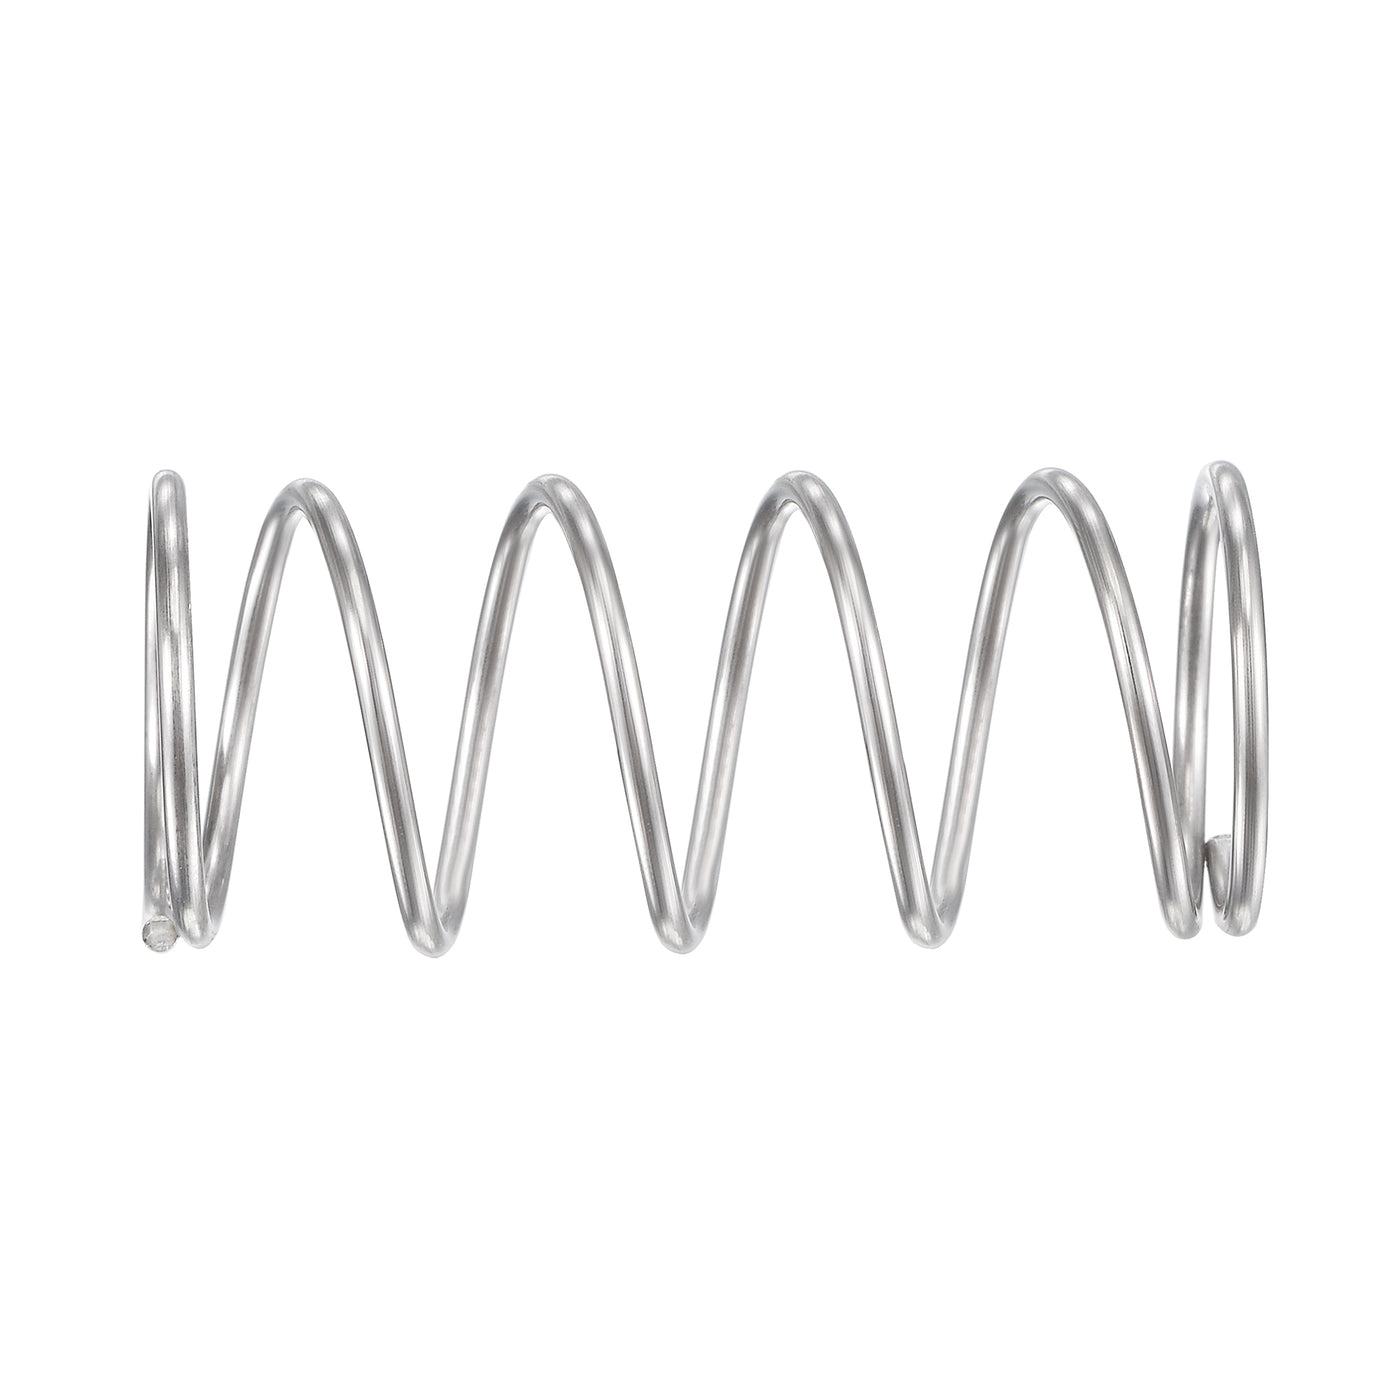 uxcell Uxcell 16mmx1.2mmx35mm 304 Stainless Steel Compression Spring 15.7N Load Capacity 10pcs